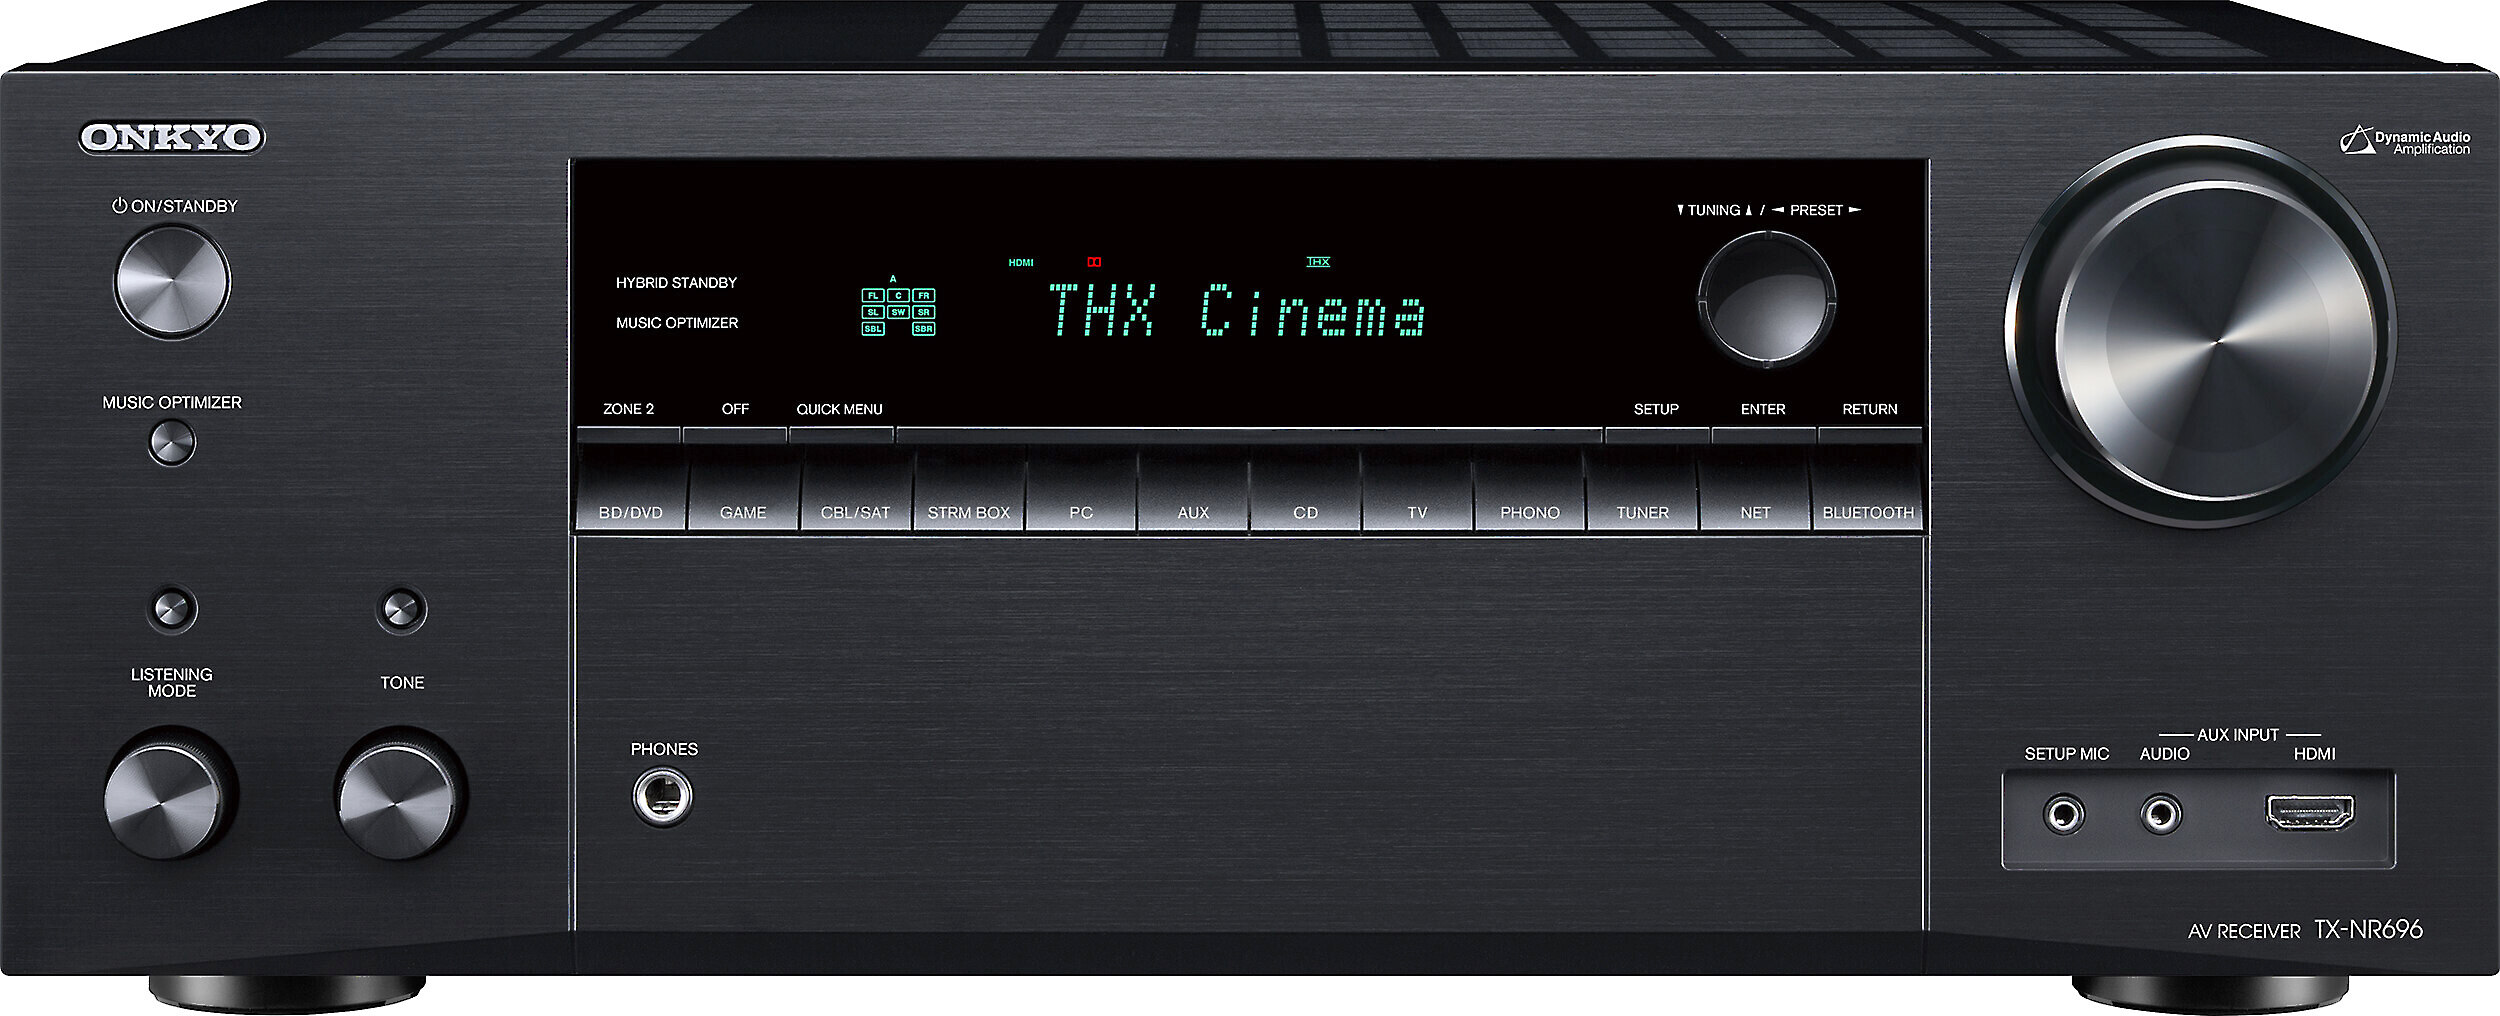 best 4k home theater receiver